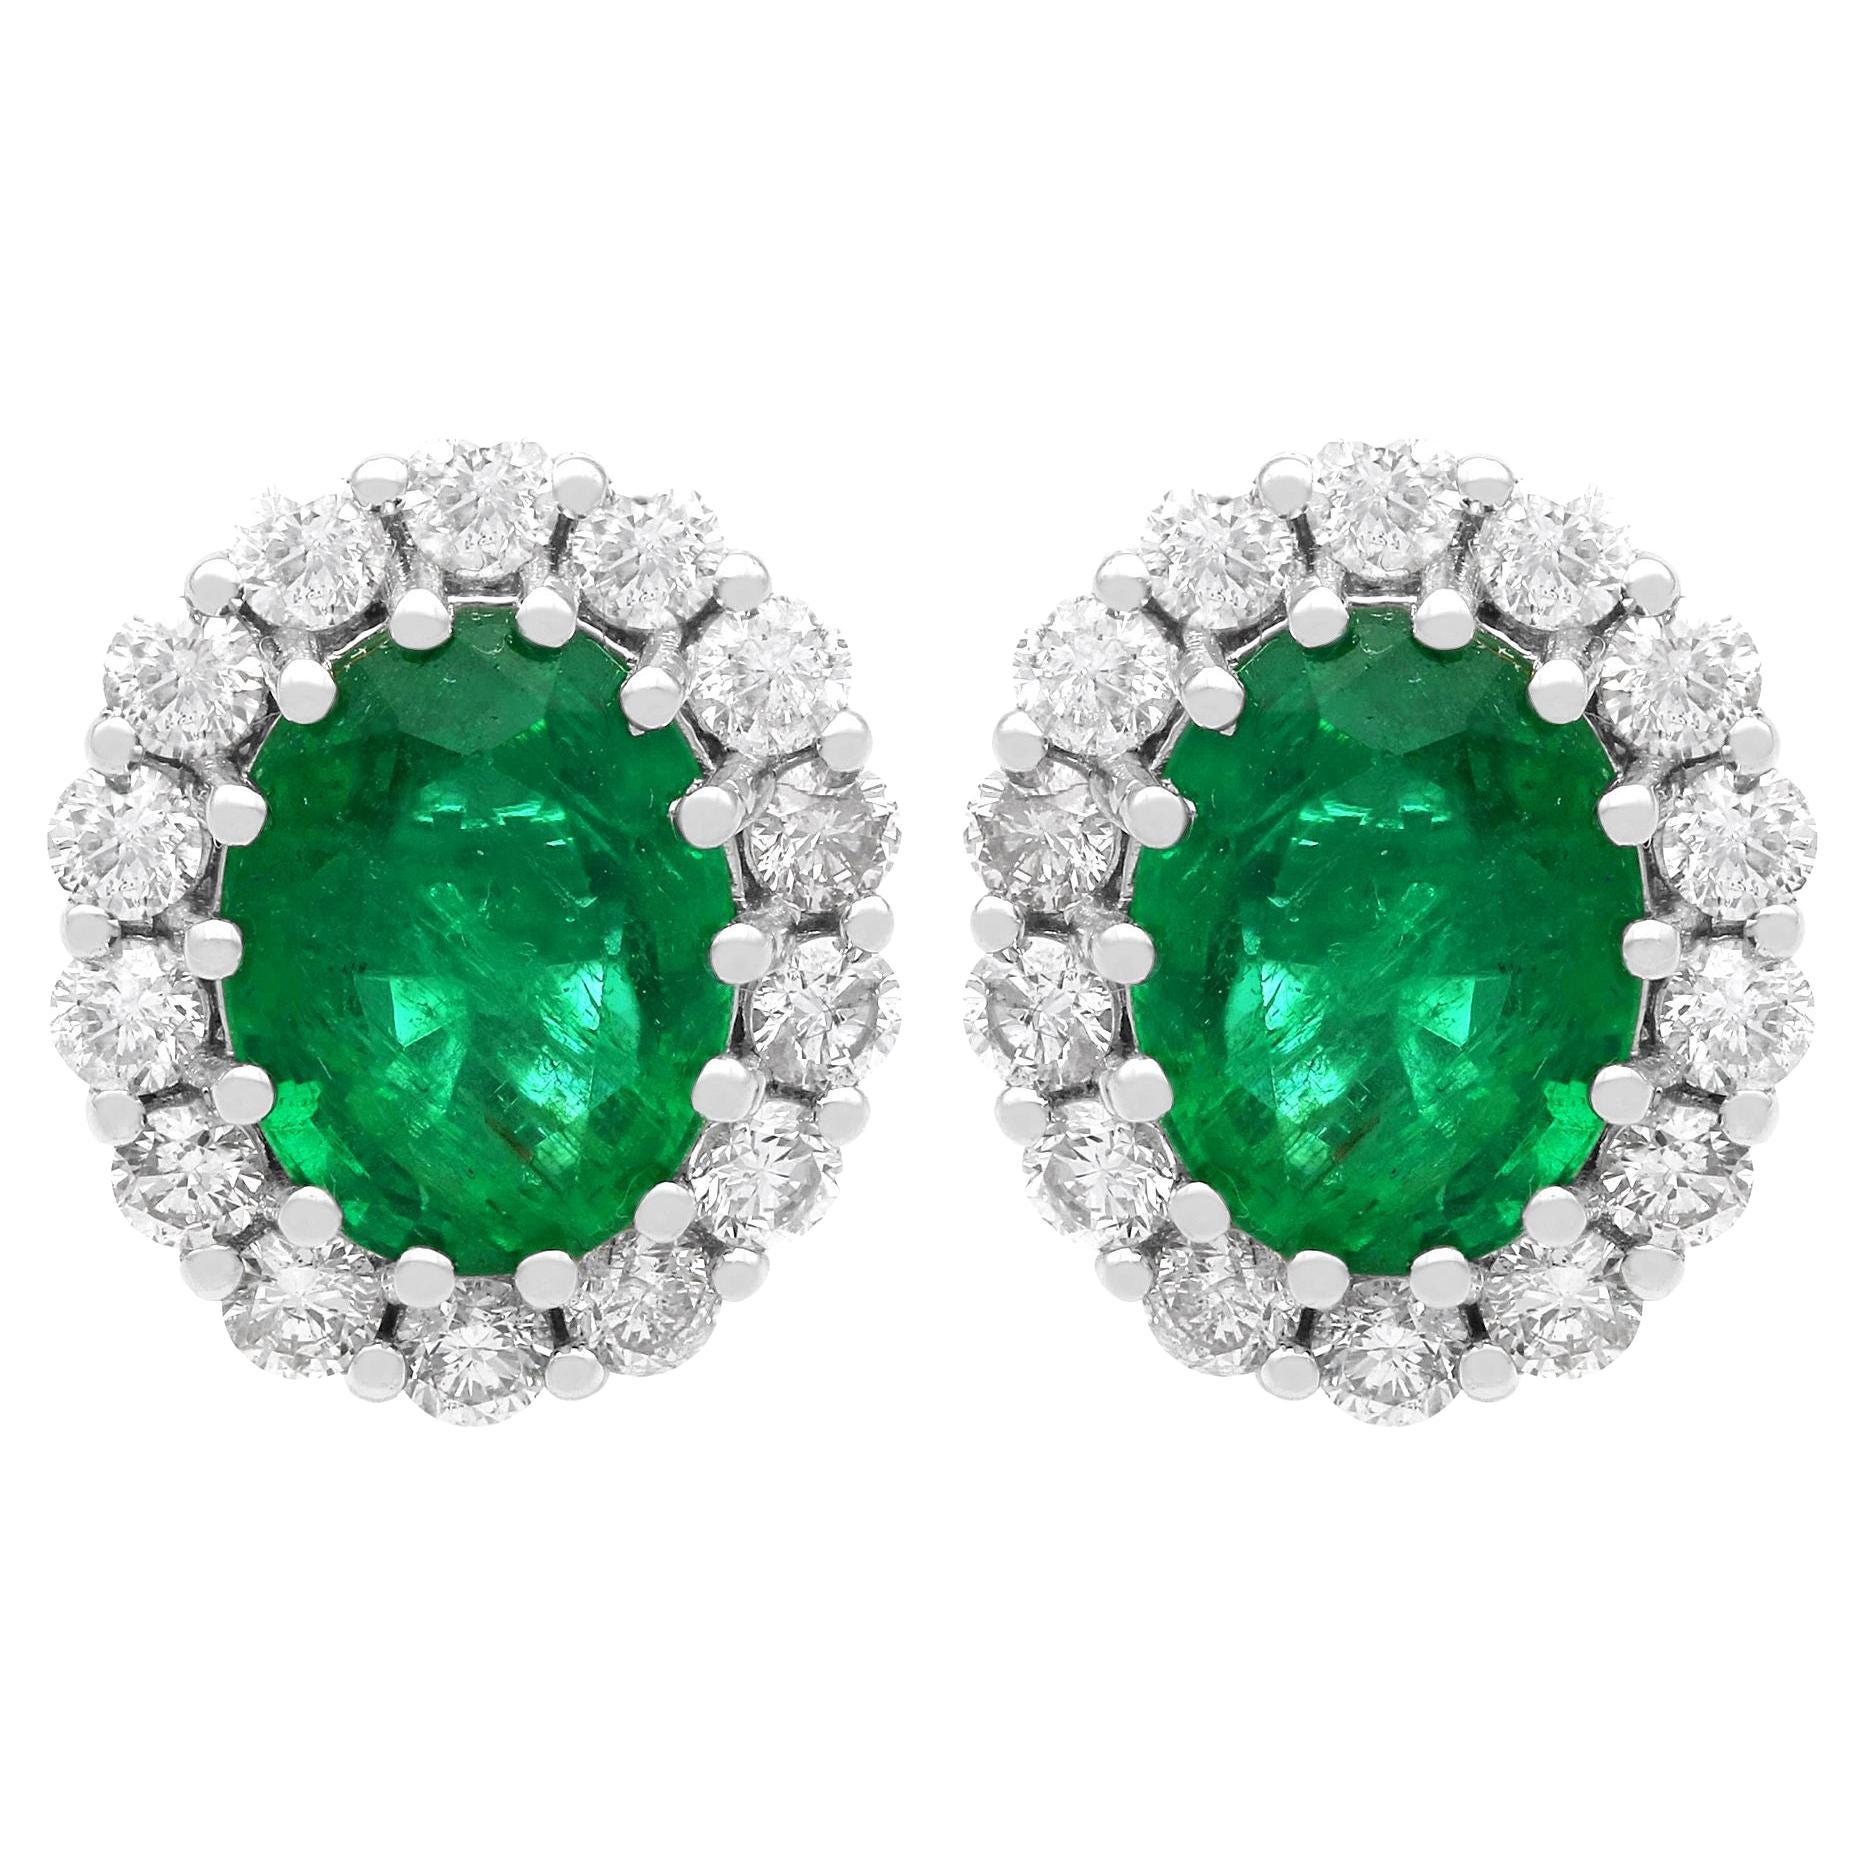 Vintage 3.50ct Emerald and 0.70ct Diamond Cluster Earrings in 18ct White Gold For Sale